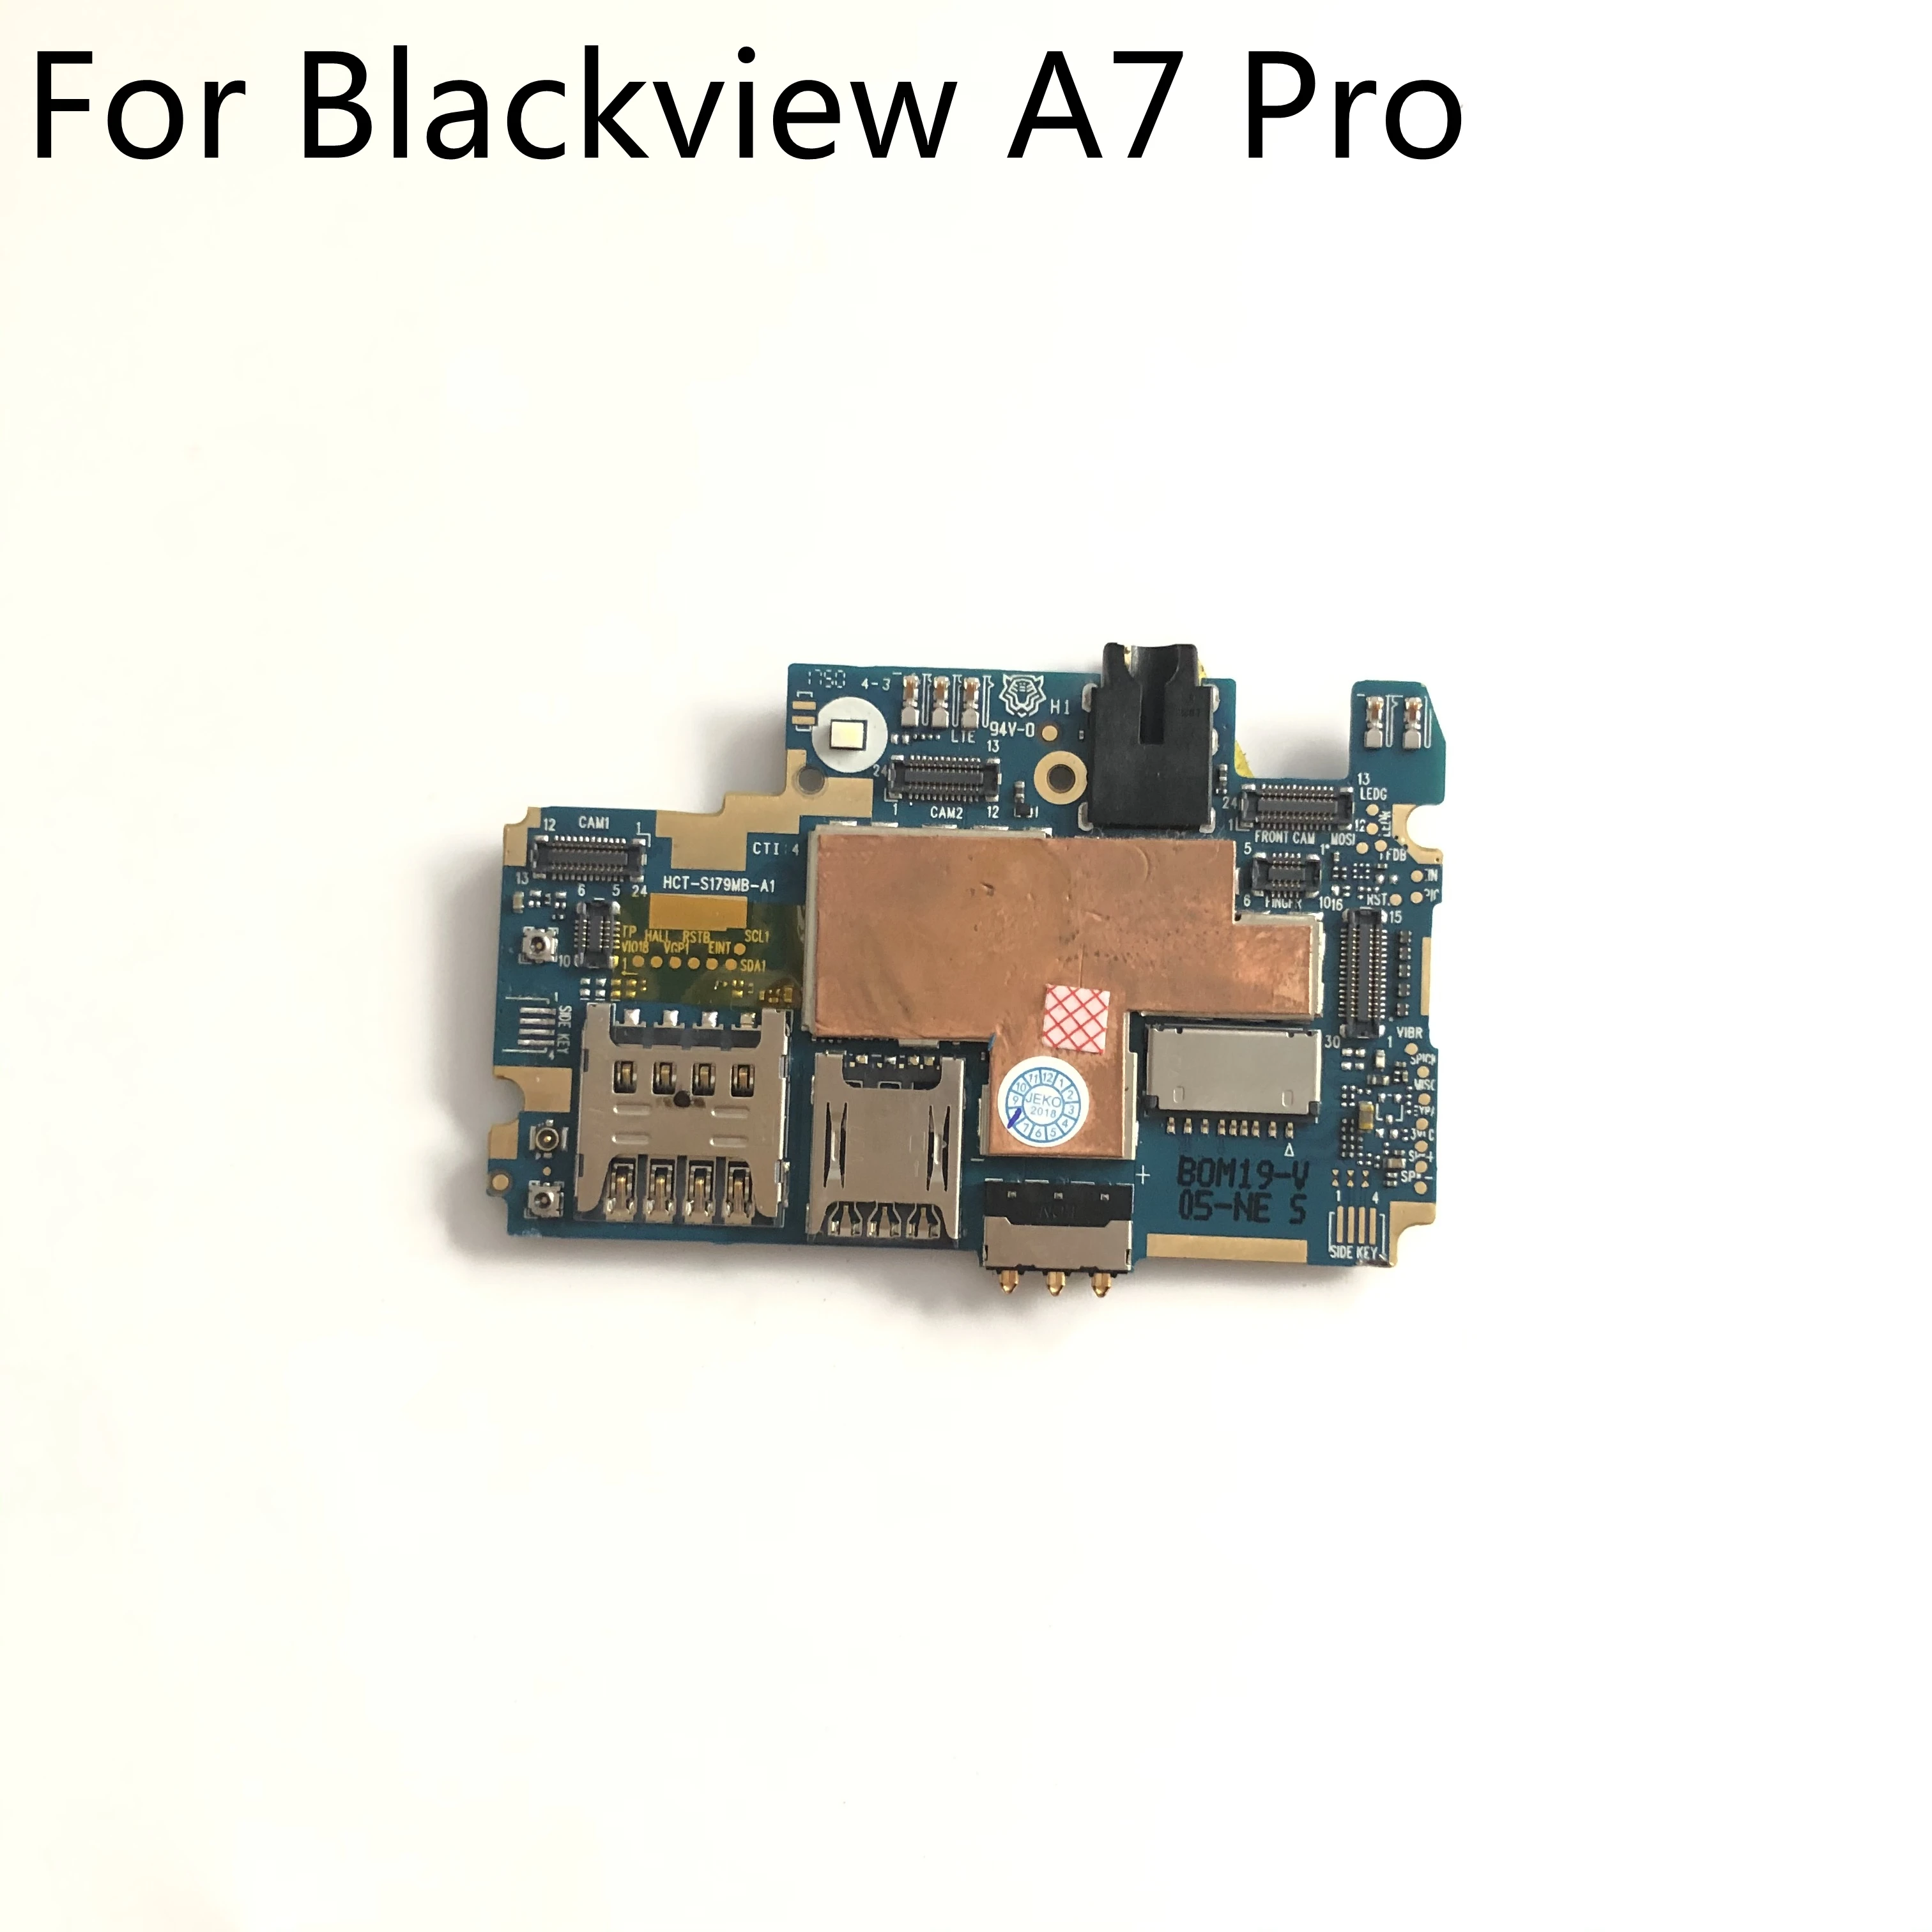 

High Quality Mainboard 2G RAM+16G ROM Motherboard For Blackview A7 Pro MTK6737 5.0" 1280x720 Free Shipping + Tracking Number